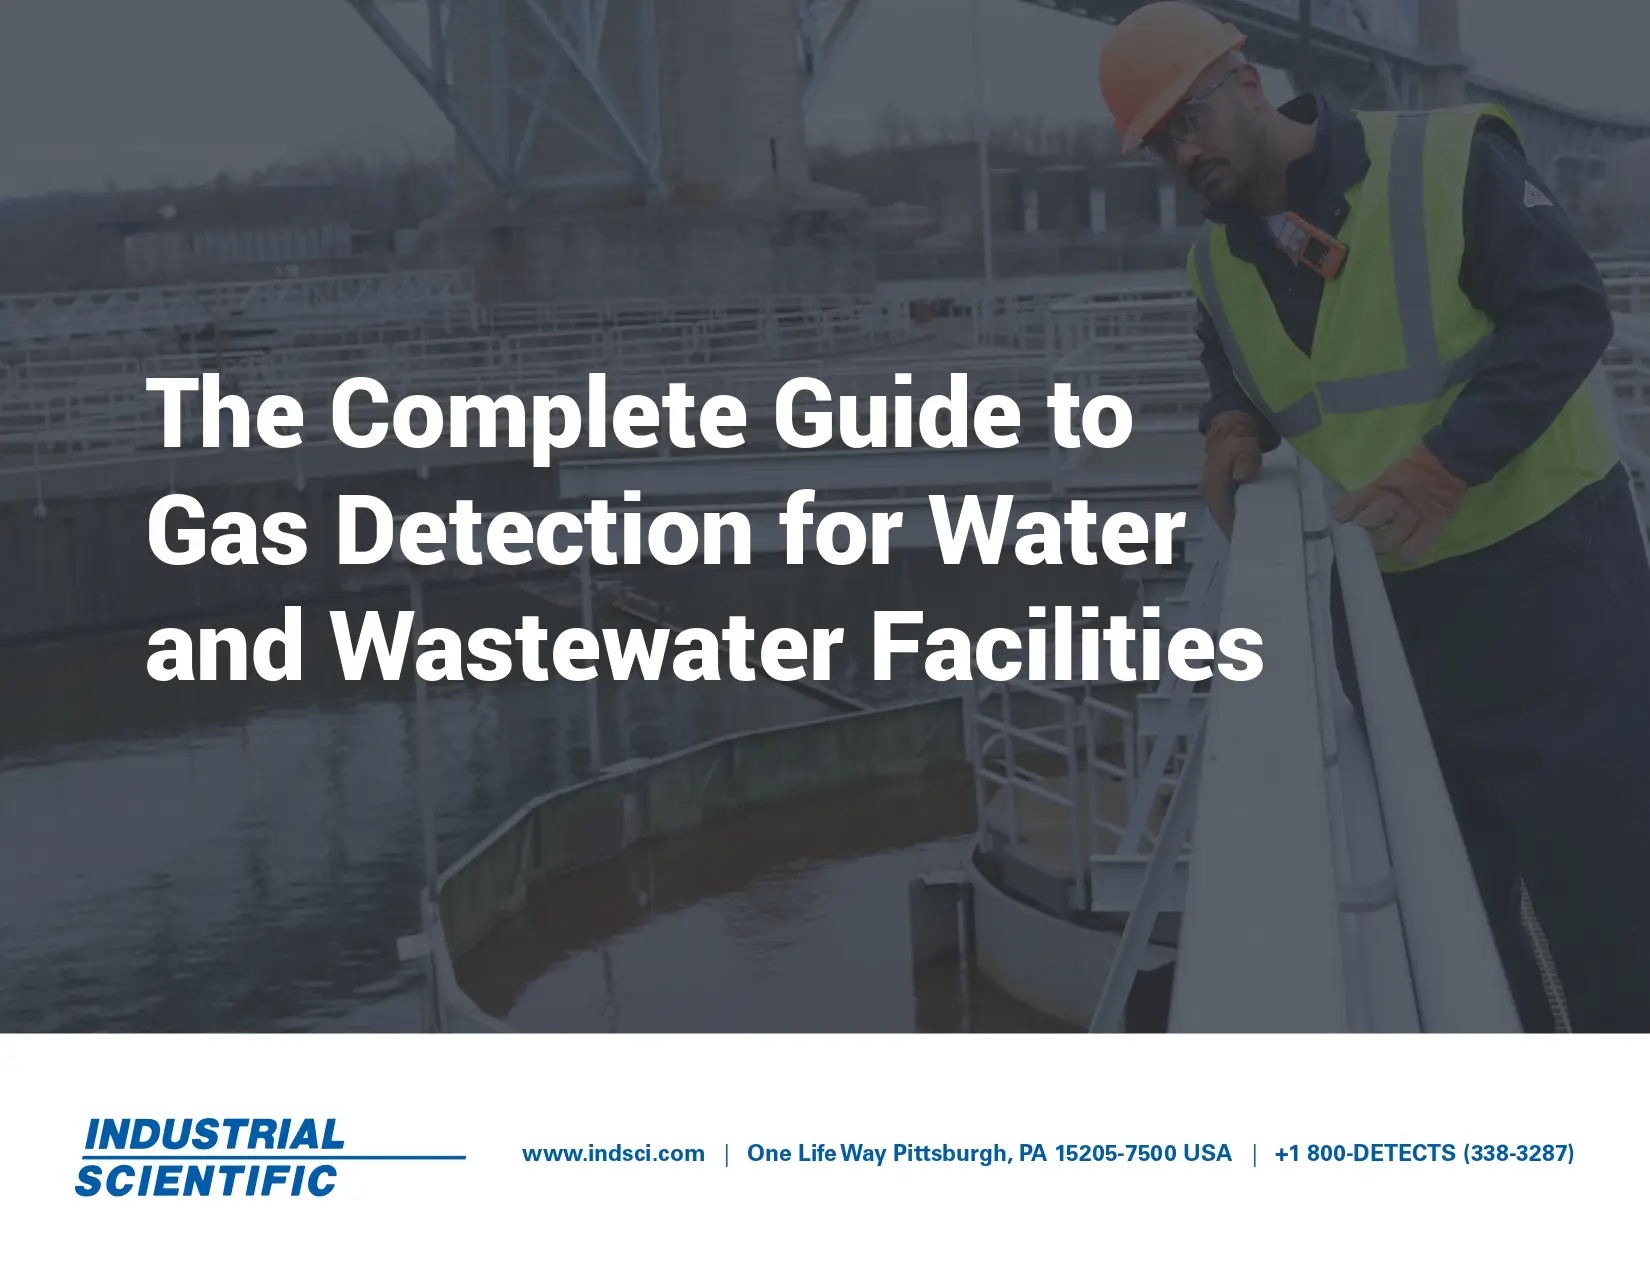 The Complete Guide to Gas Detection for Water and Wastewater Facilities